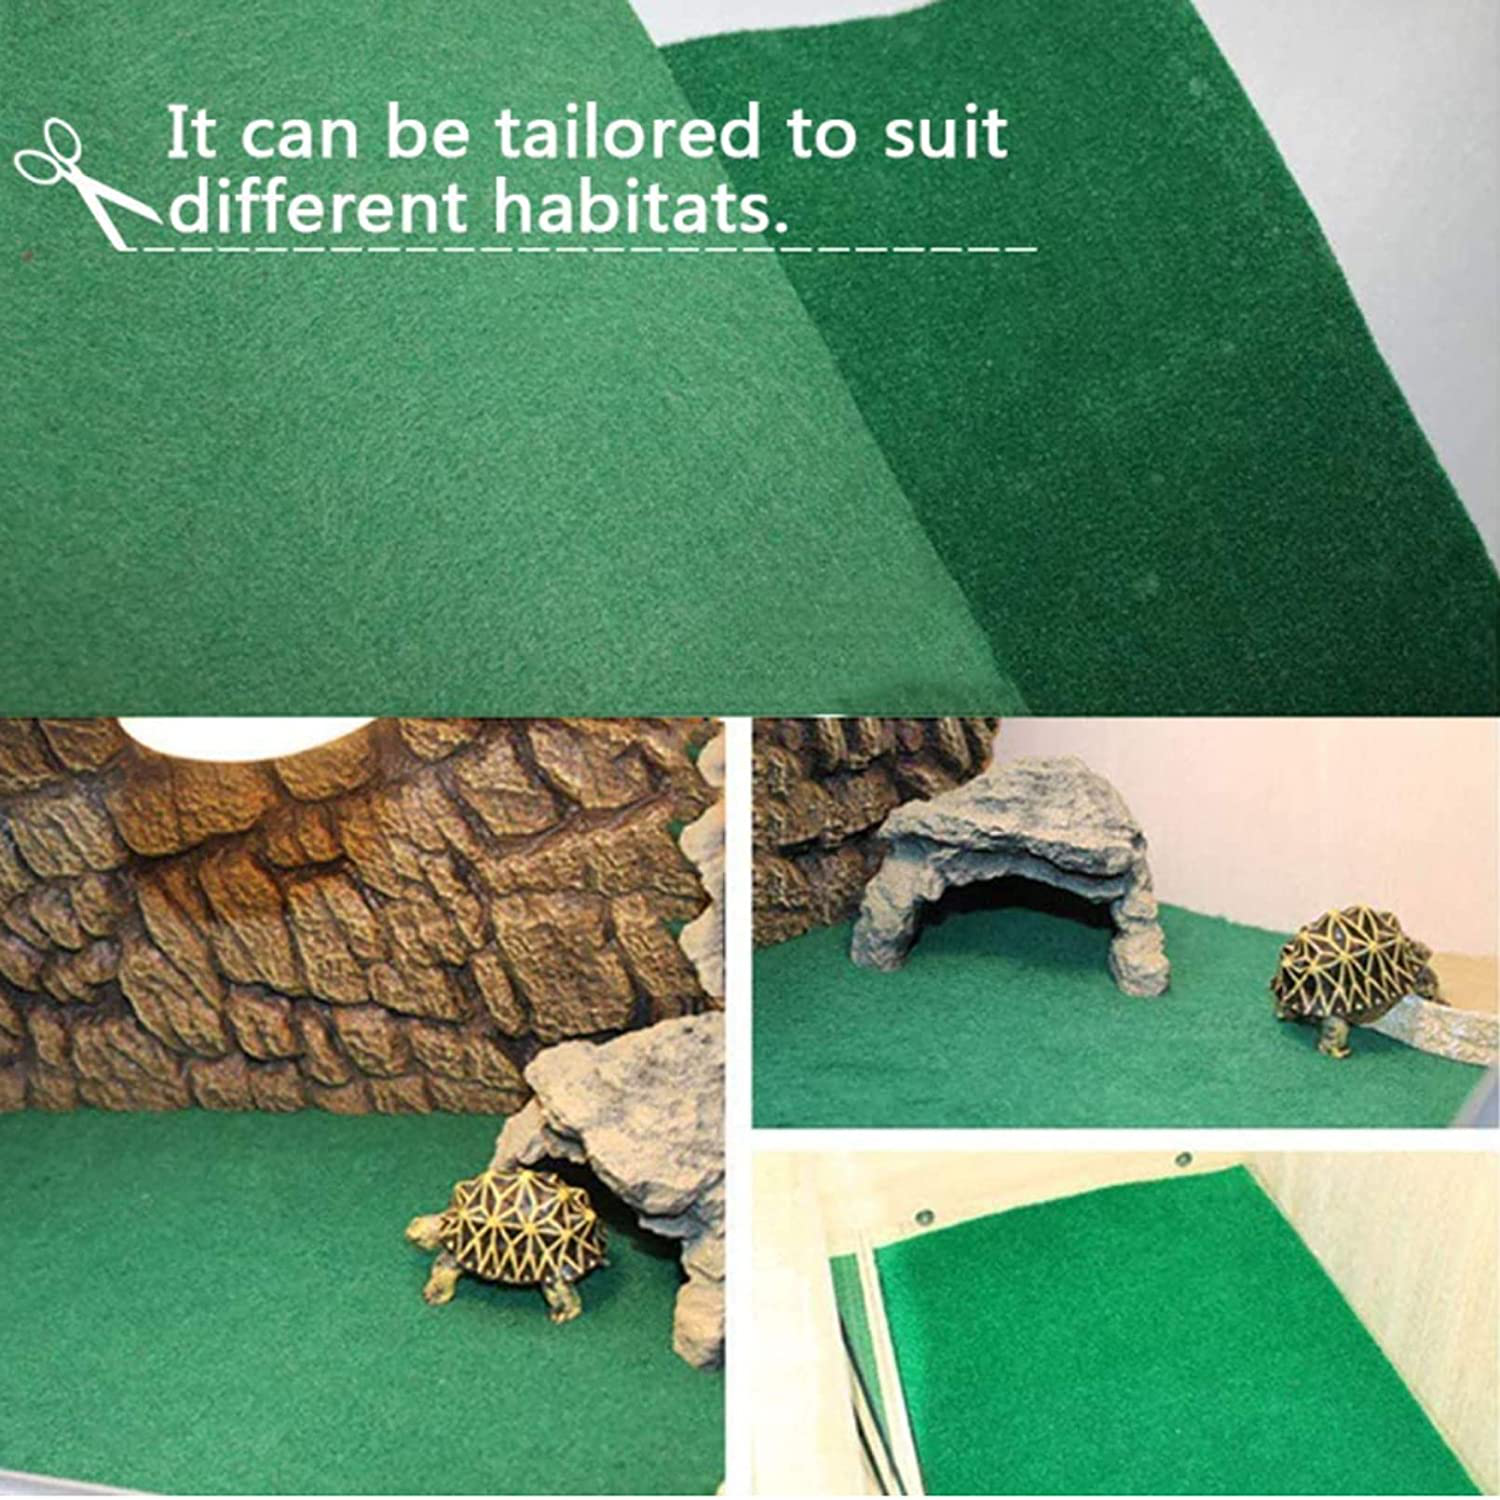 Tfwadmx Reptile Carpet Mat Large Substrate Liner Bedding Reptile Supplies for Terrarium Lizards Snakes Bearded Dragon Gecko Chamelon Turtles Iguana (39"X20")